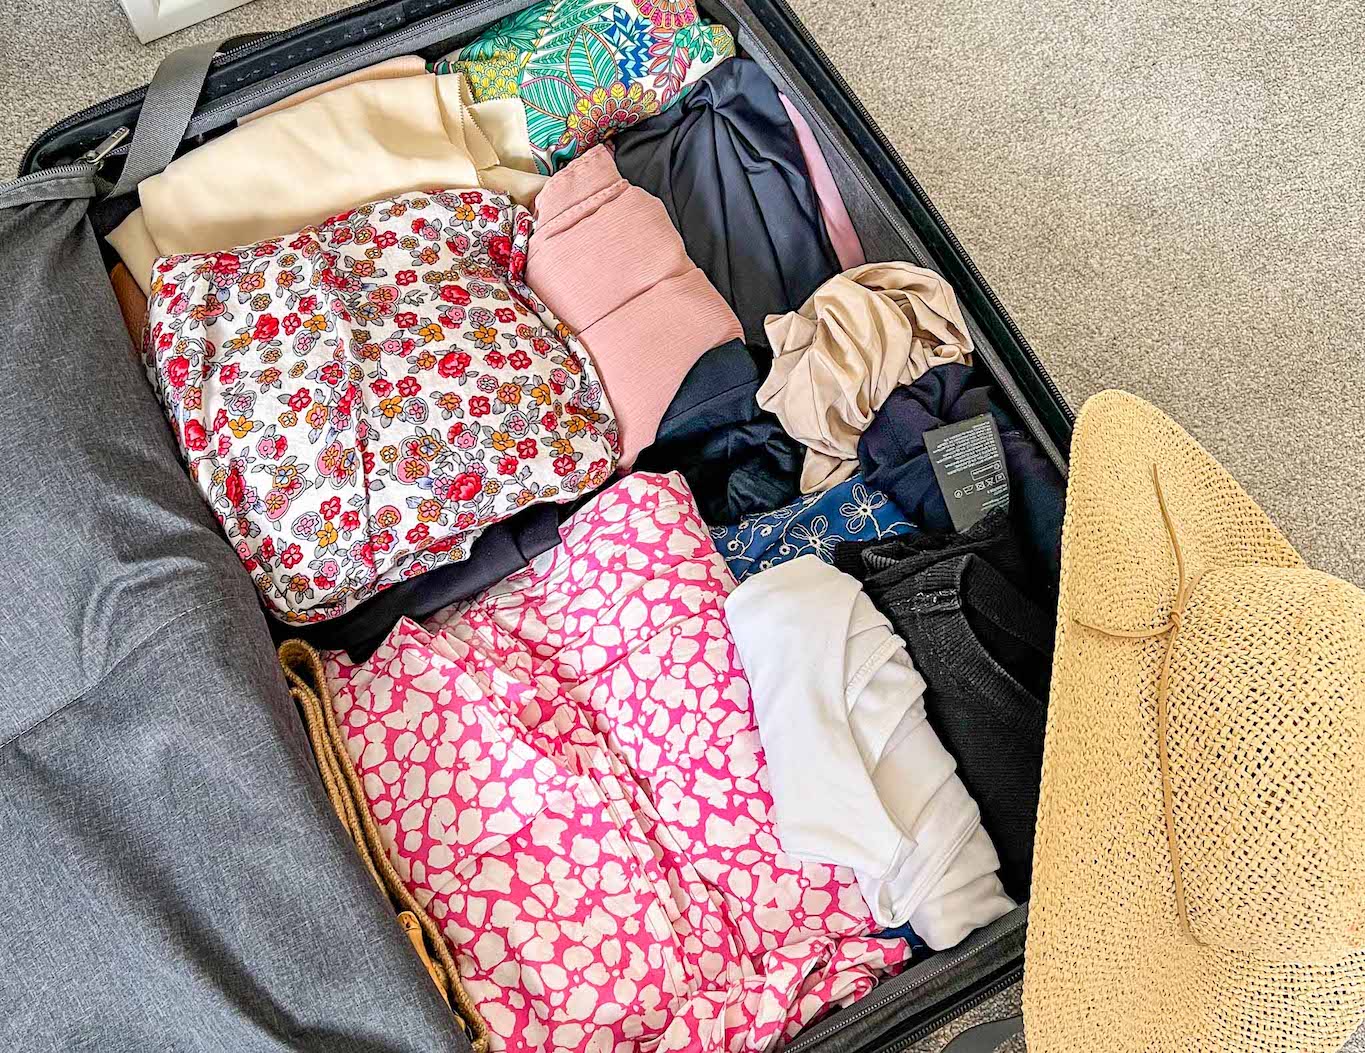 The Wandering Quinn Travel Blog travel tips for Muslim Women, packing as a hijabi